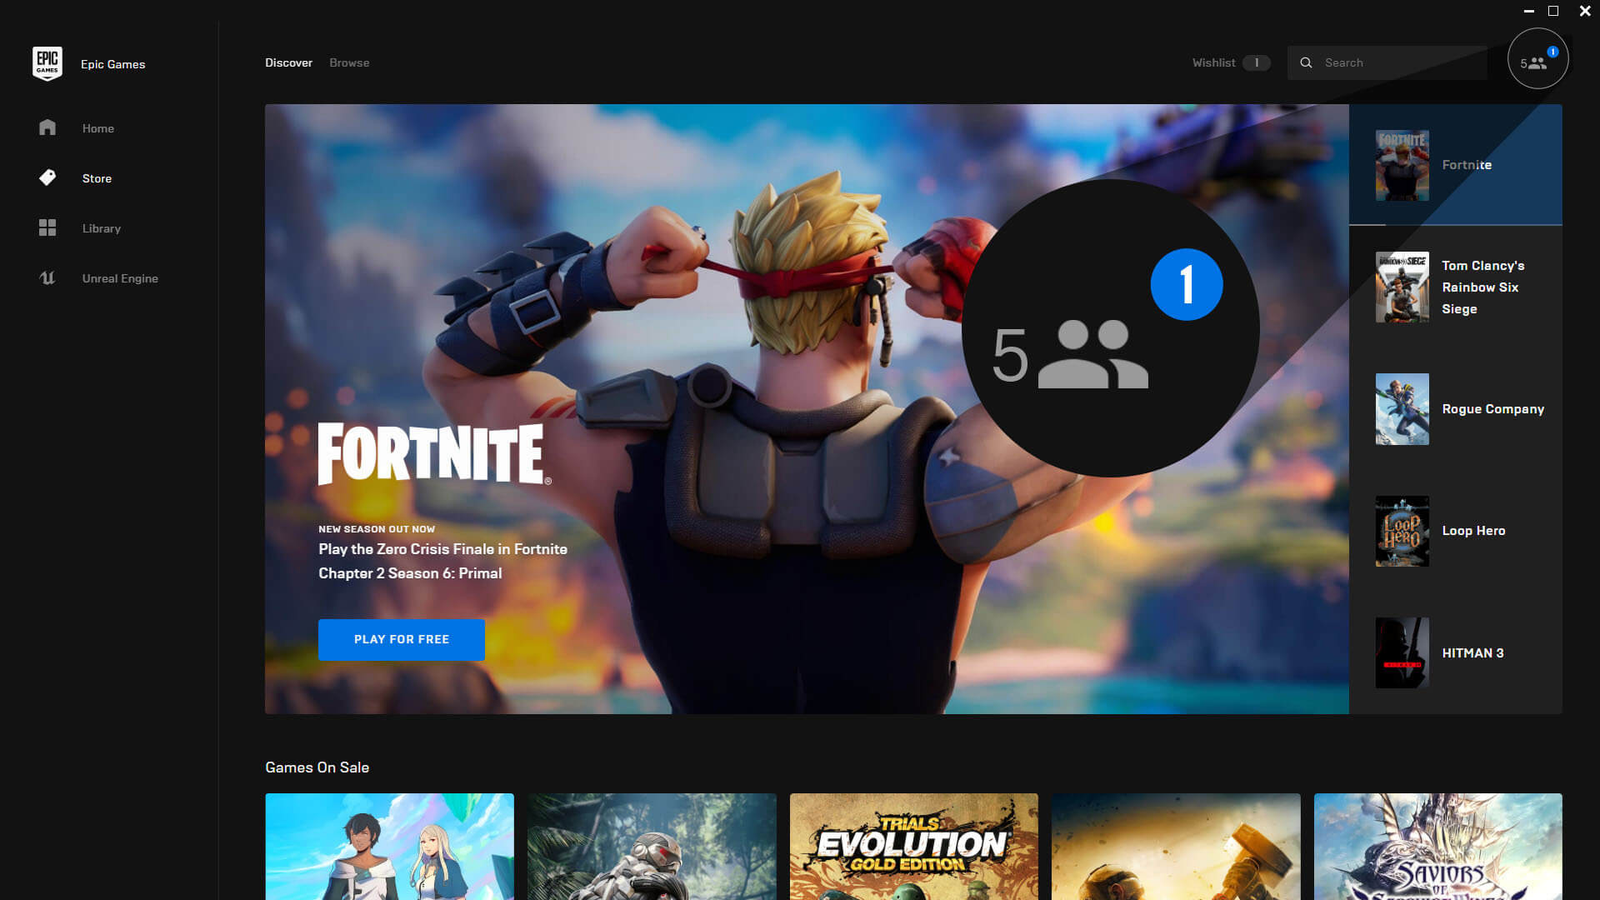 Stream episode How Can I Activate The Epic Games On The Xbox by Epic Games  podcast